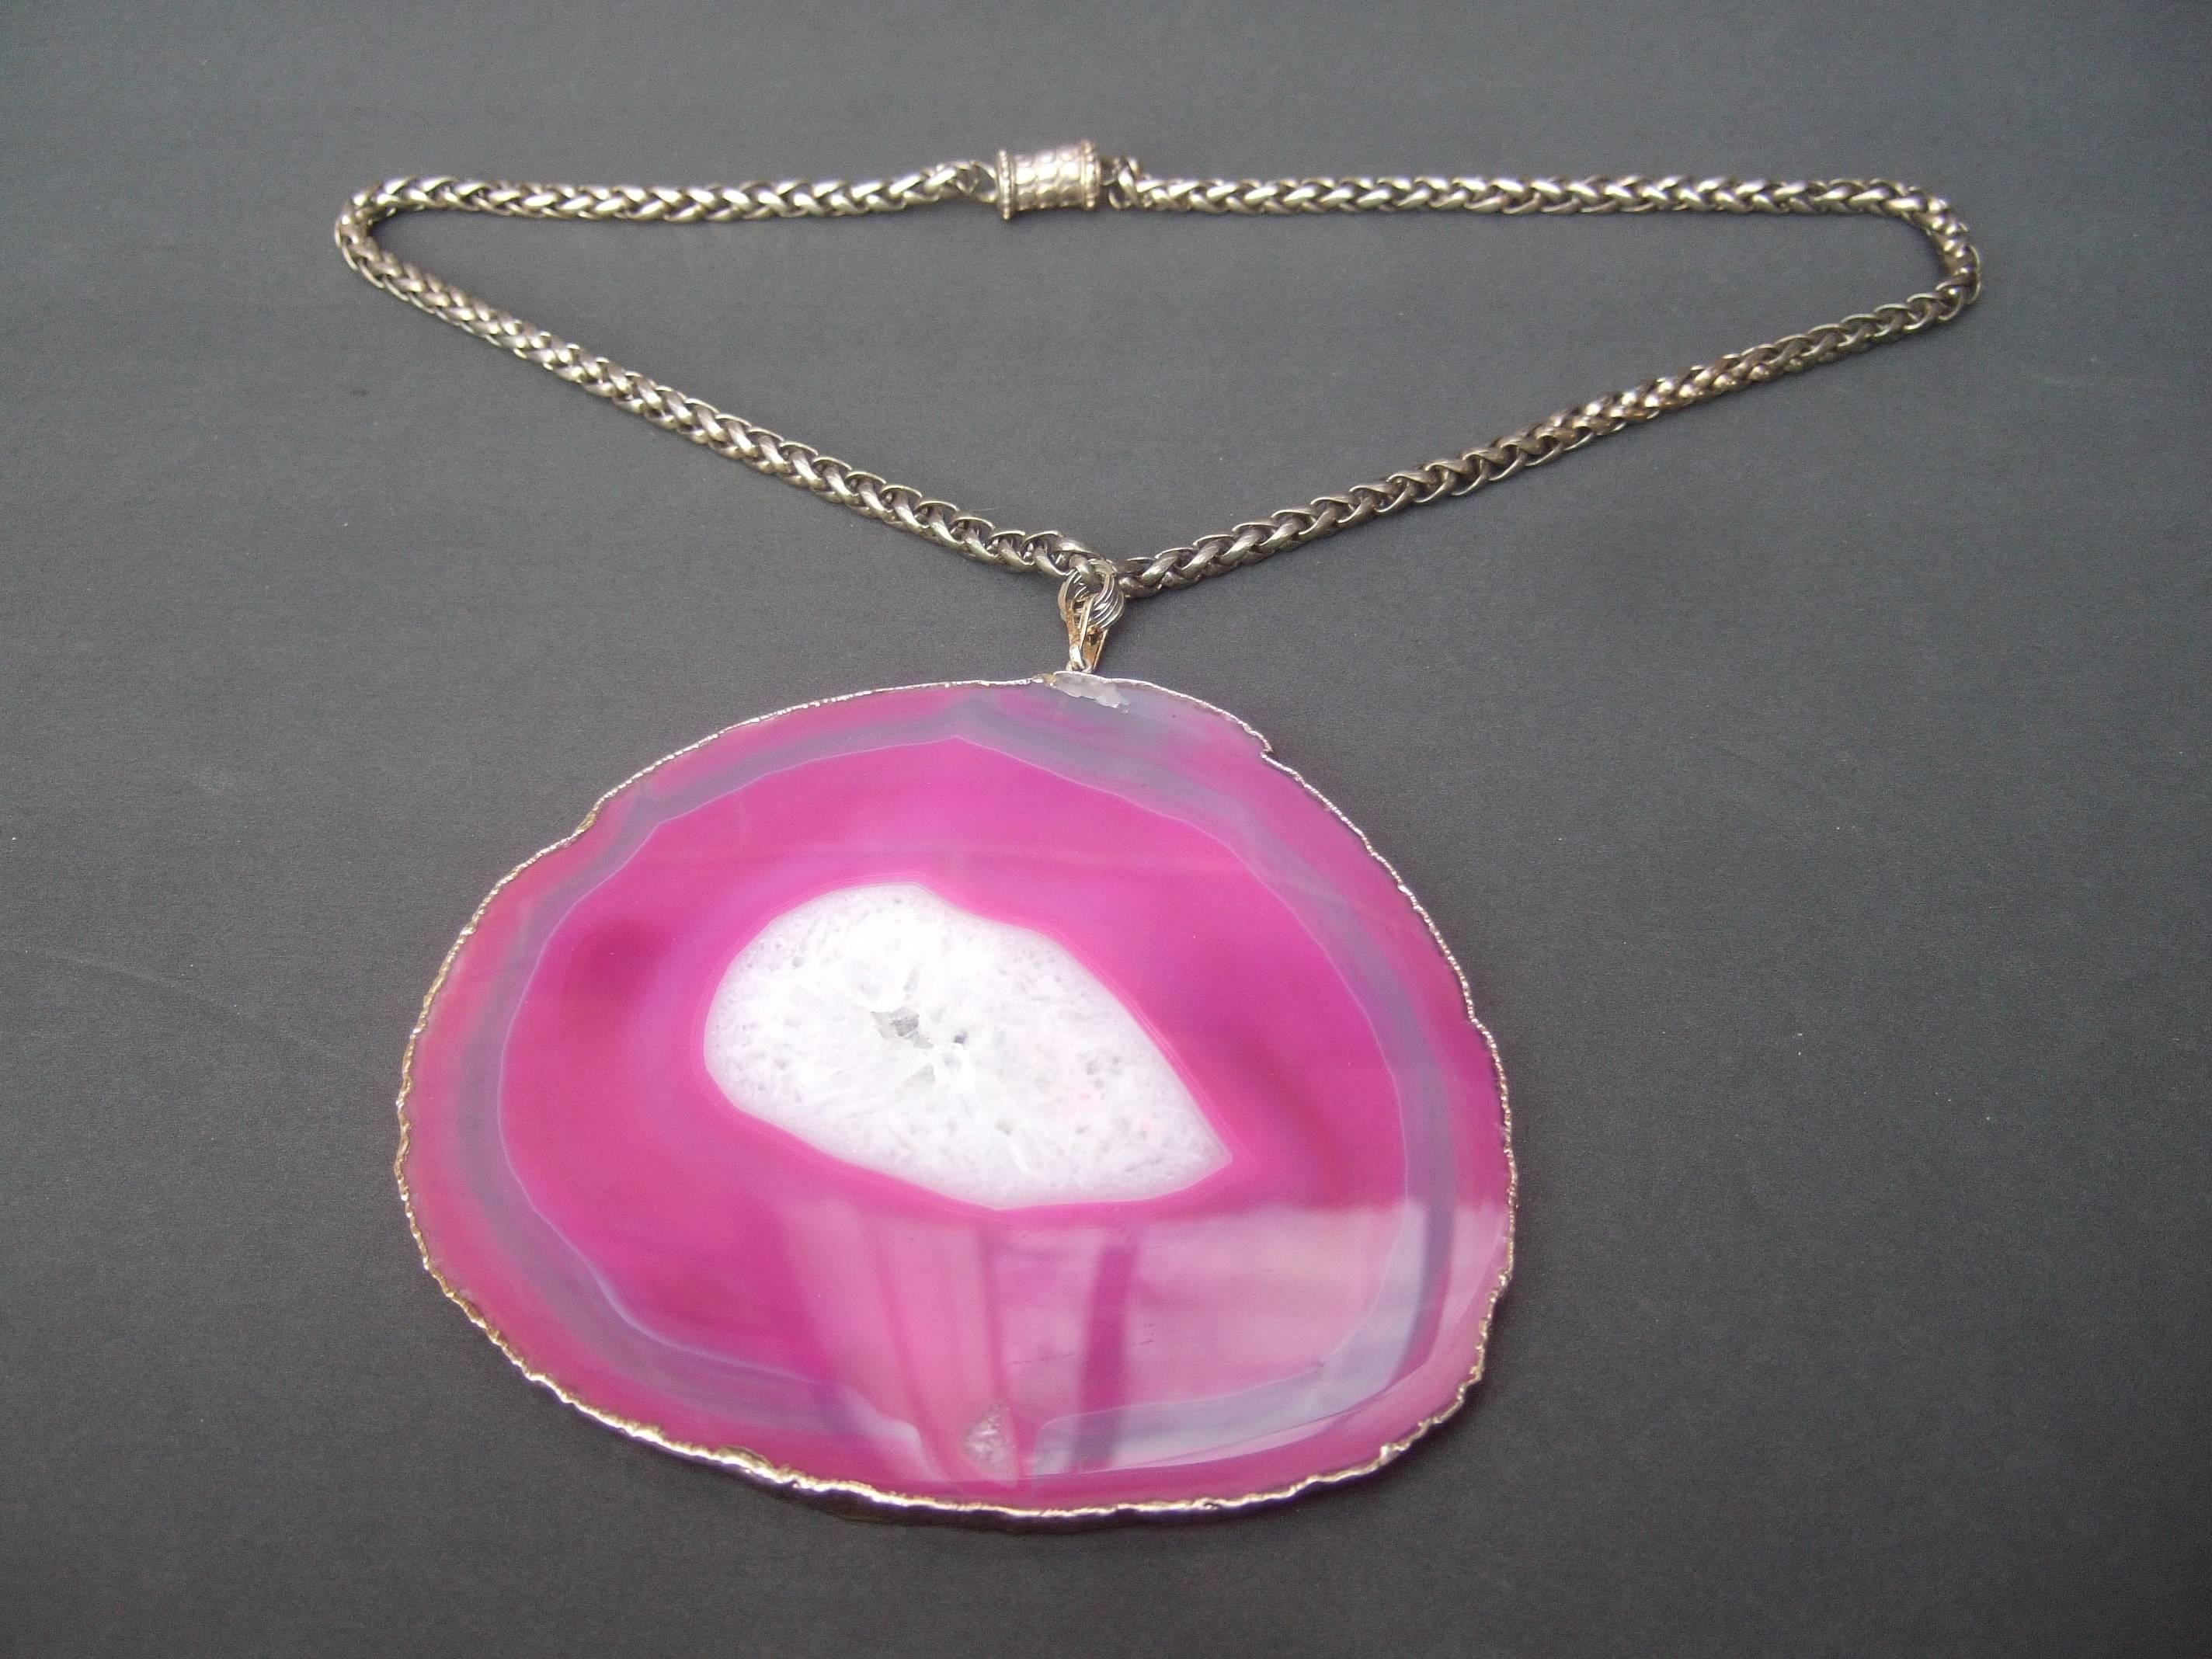 Massive fuchsia sliced agate pendant necklace
The avant-garde artisan necklace is adorned
with a huge sliced agate tile encased is a 
hammered metal bezel that frames the organic 
contours 

The large sliced agate is suspended from a
